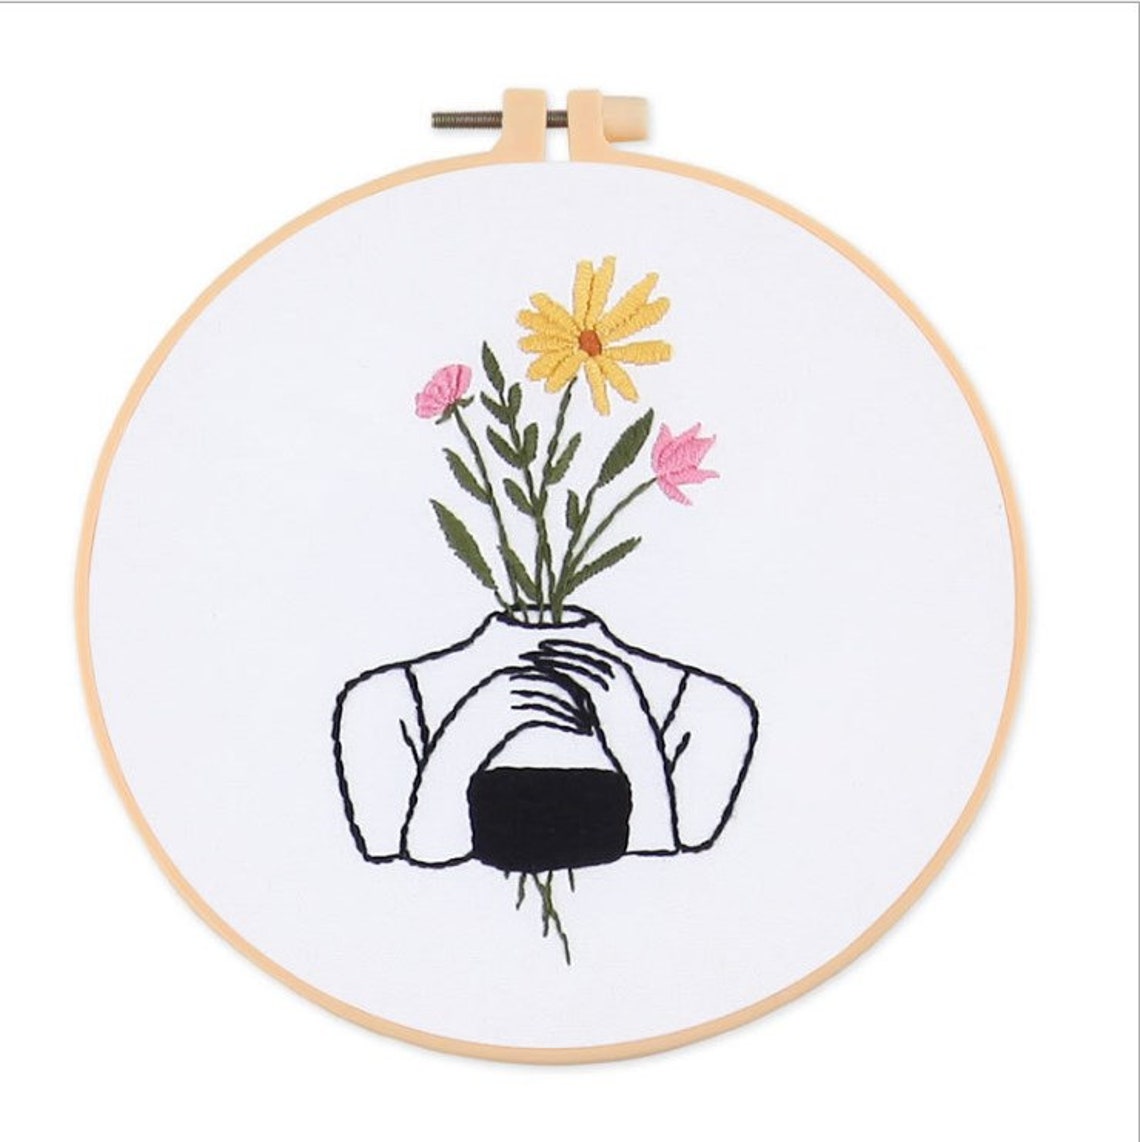 Female Form With Flowers - Beginners Embroidery Kit